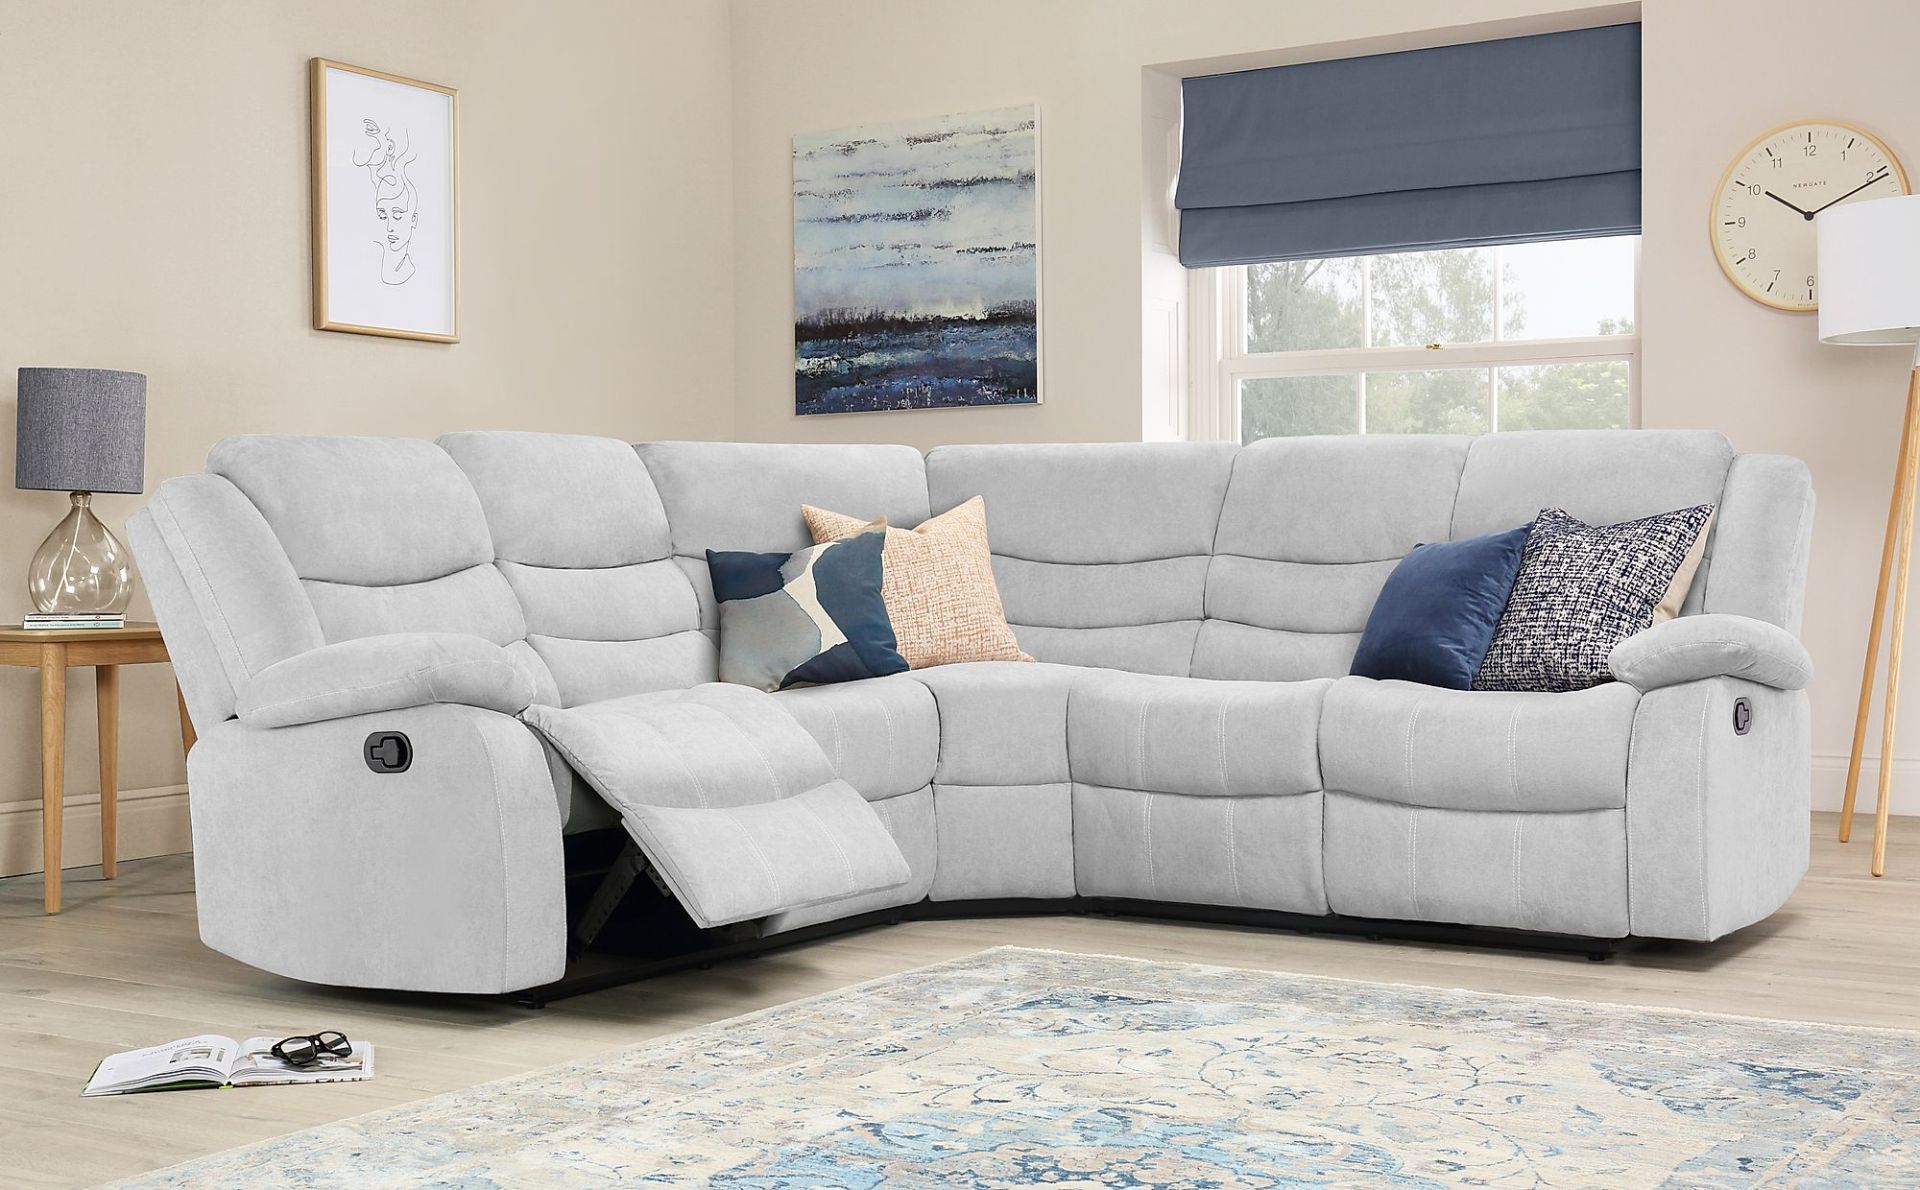 Sorrento Large Dove Grey Fabric Corner Seater Sofa - Condition report see lot zero - Packed in